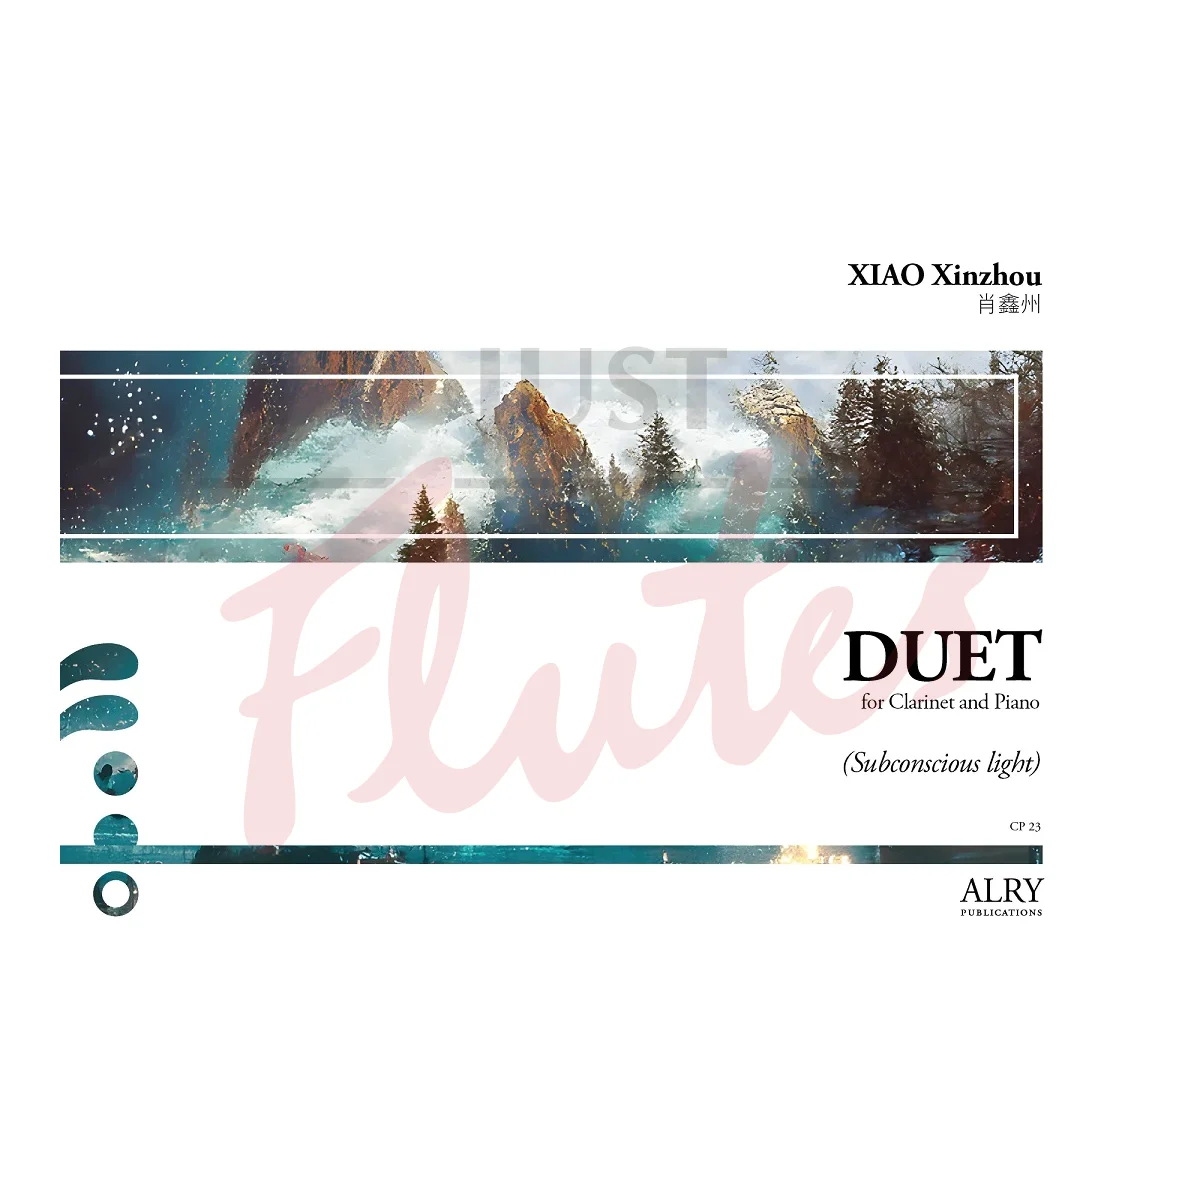 Duet (Subconscious Light) for Clarinet and Piano